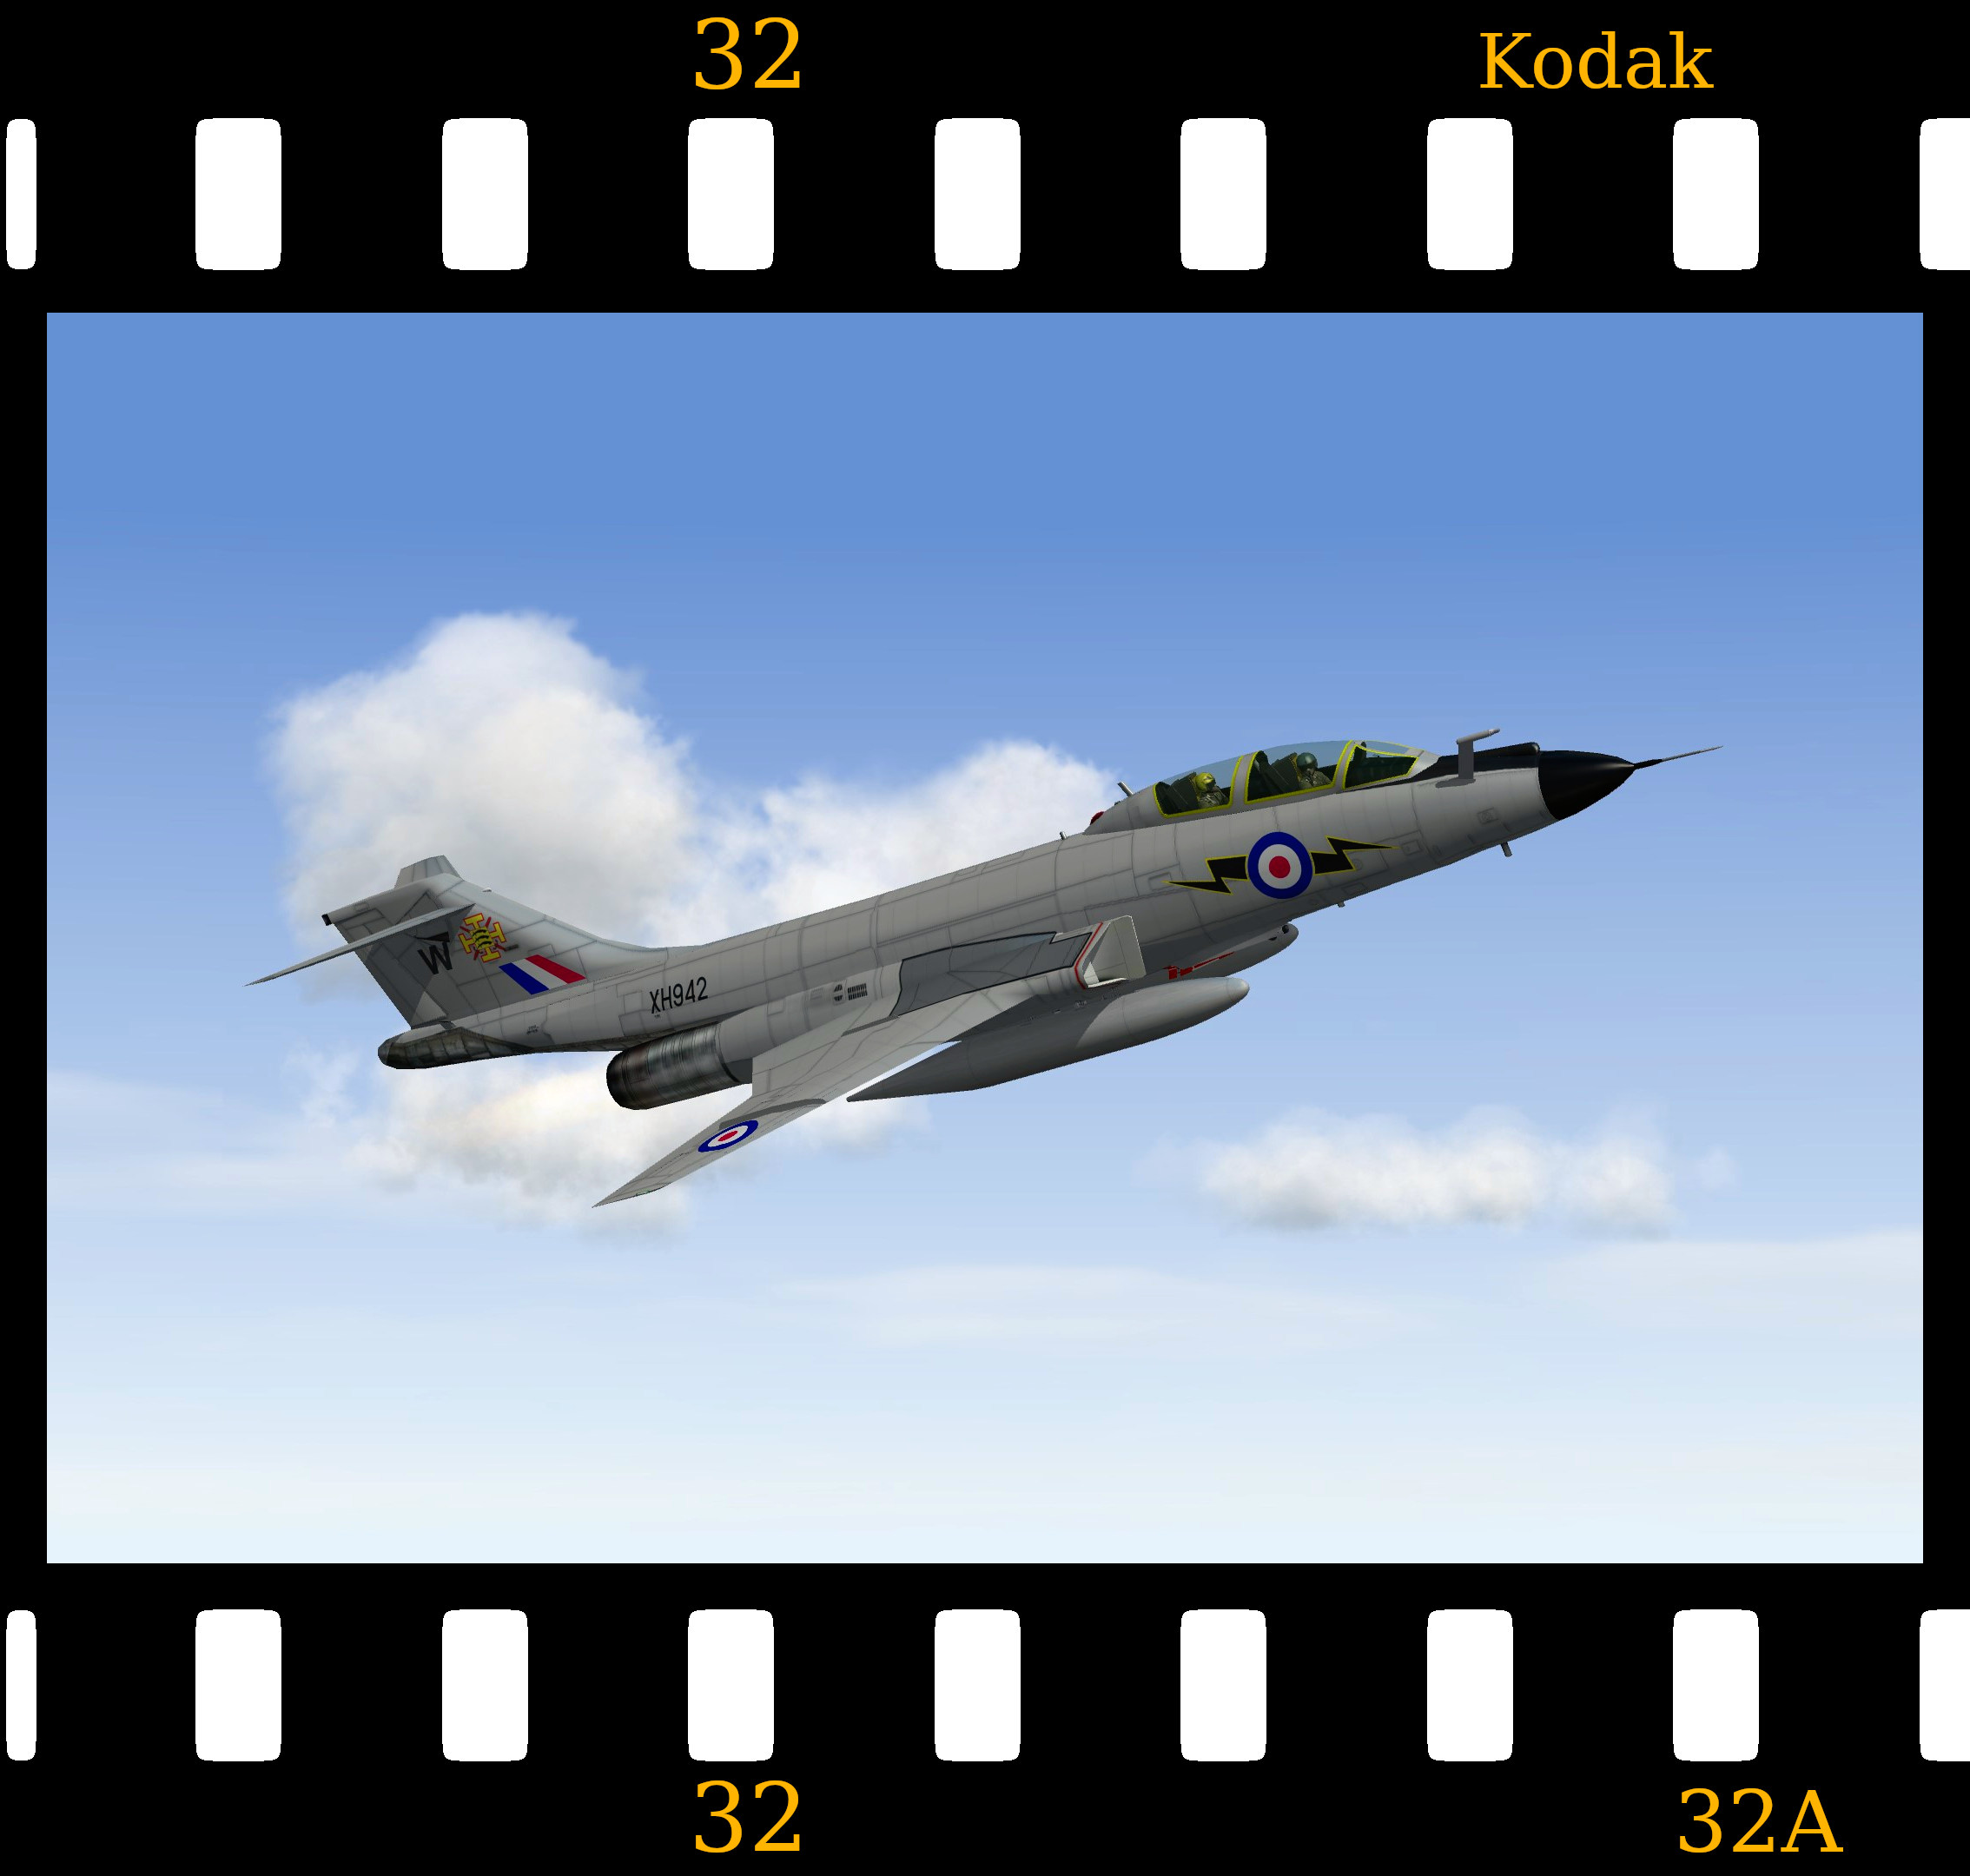 [Fictional] McDonnell Voodoo FAW.4 - RAF